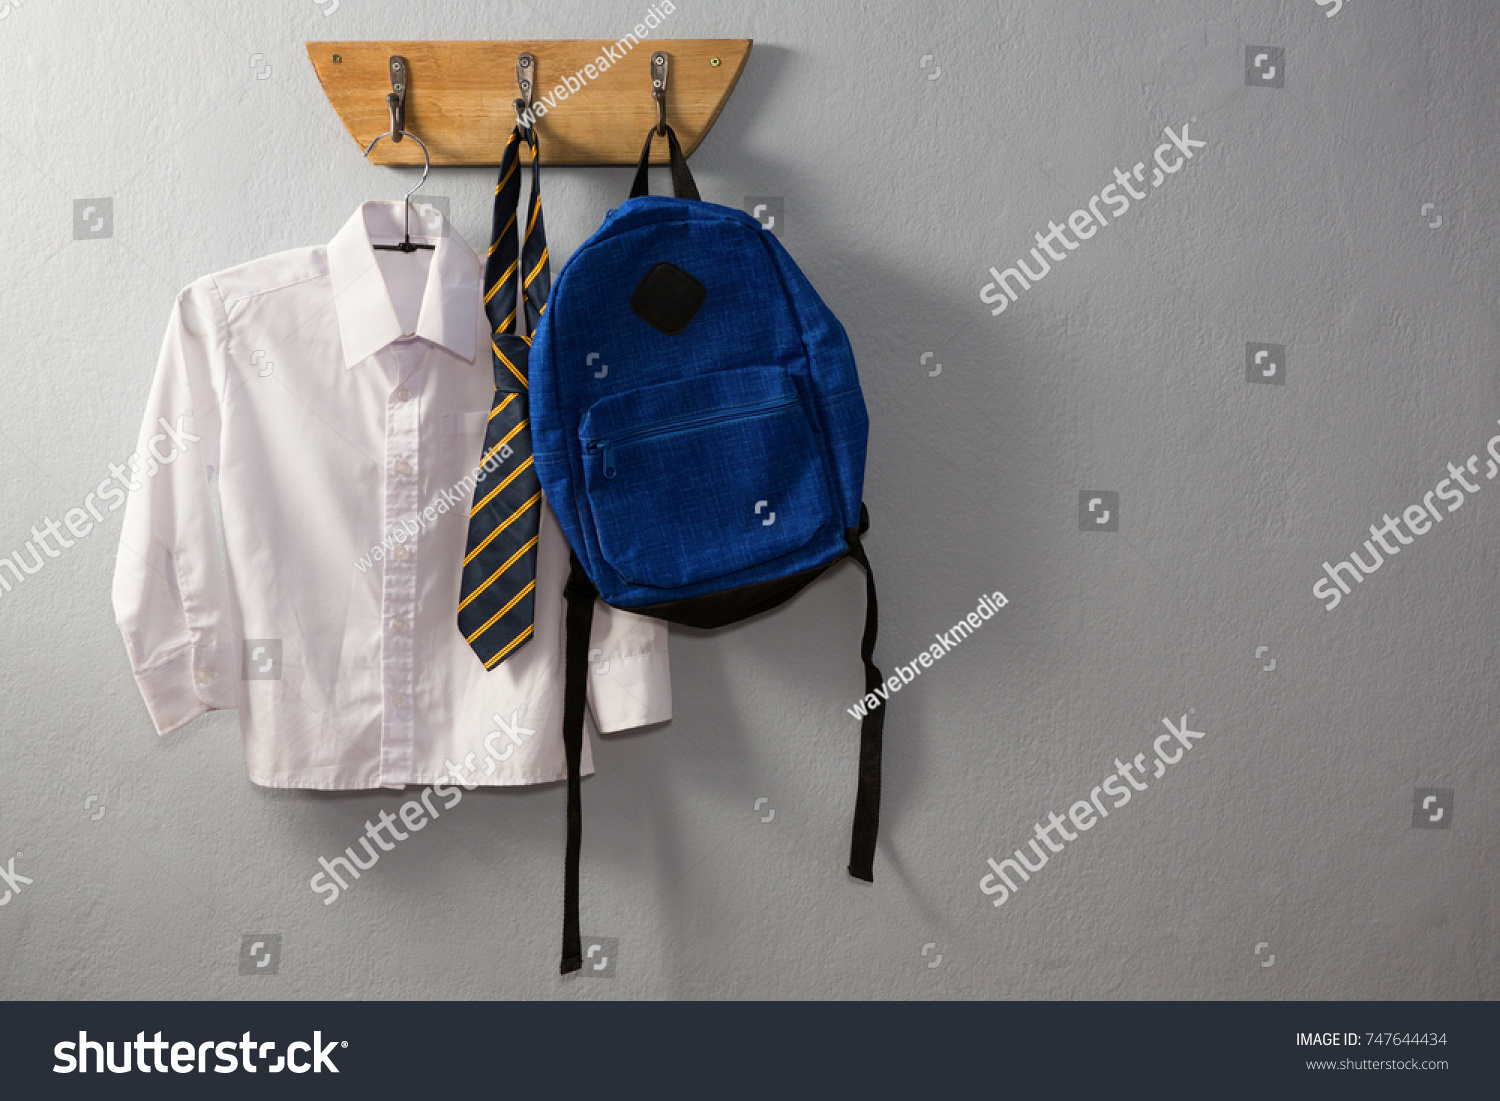 School uniform and schoolbag hanging on hook against wall #747644434